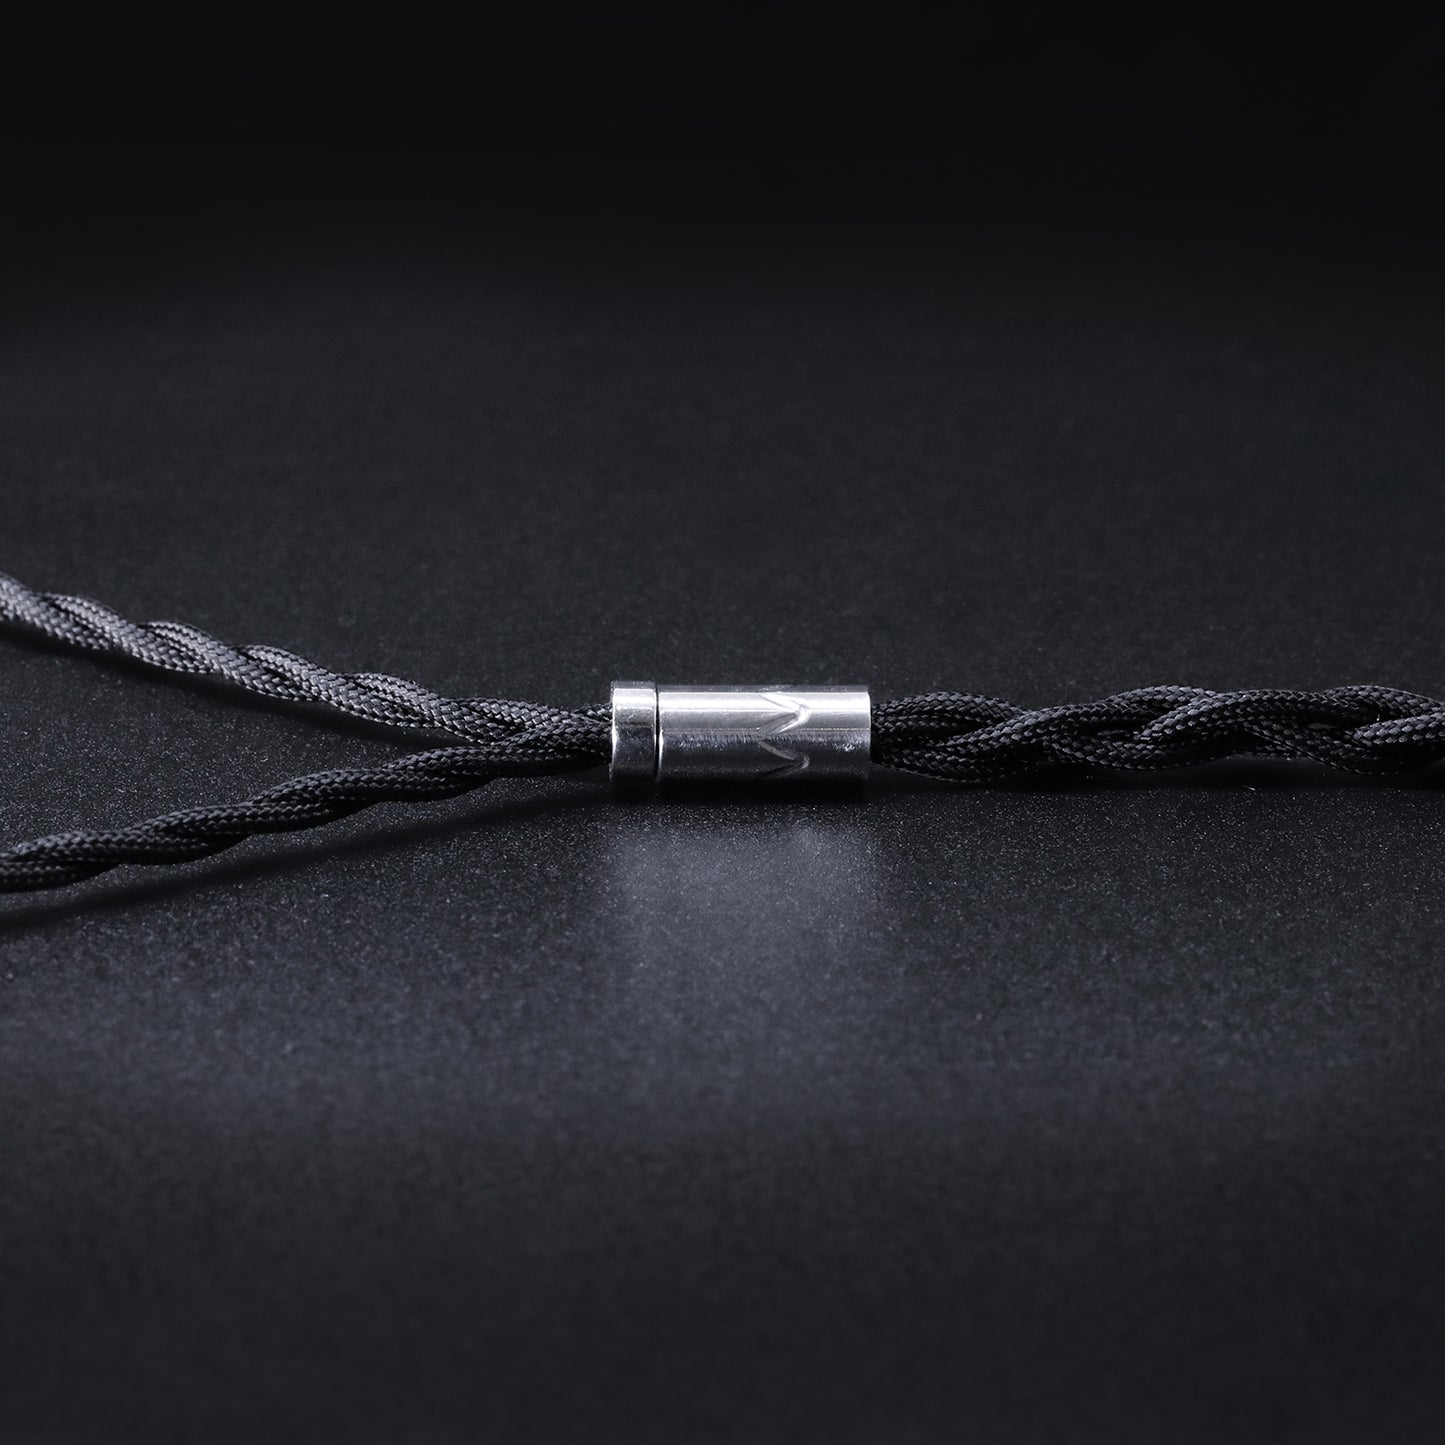 Single crystal silver upgrade cable